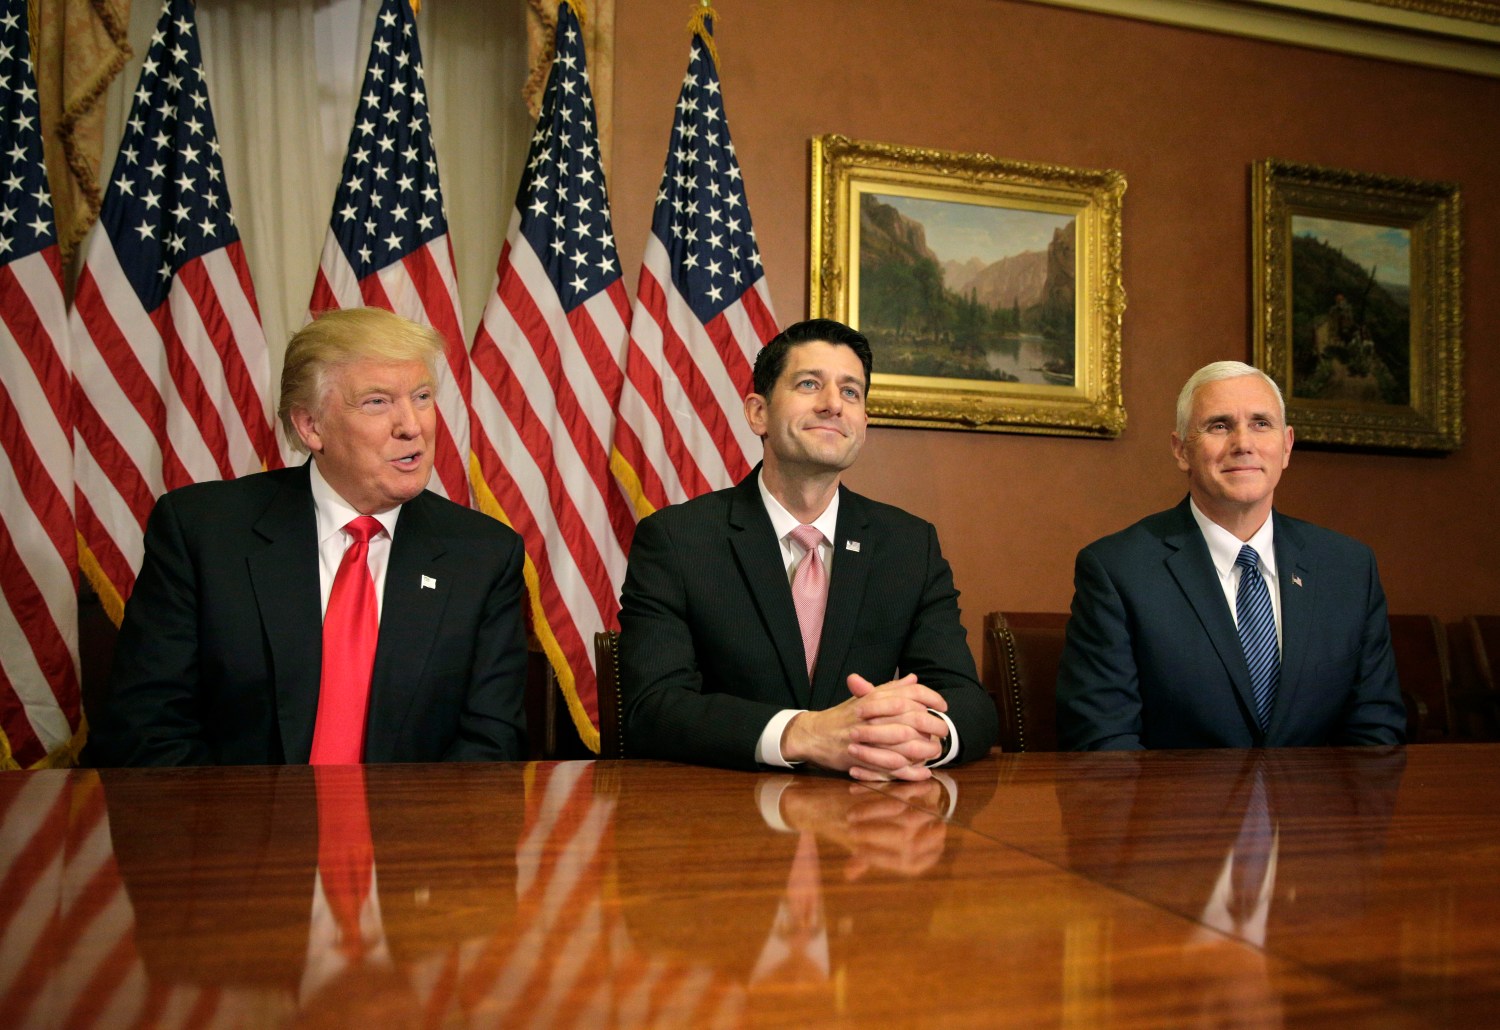 U.S. President-elect Donald Trump meets with Speaker of the House Paul Ryan (R-WI) and Vice-President elect Mike Pence on Capitol Hill in Washington, U.S.